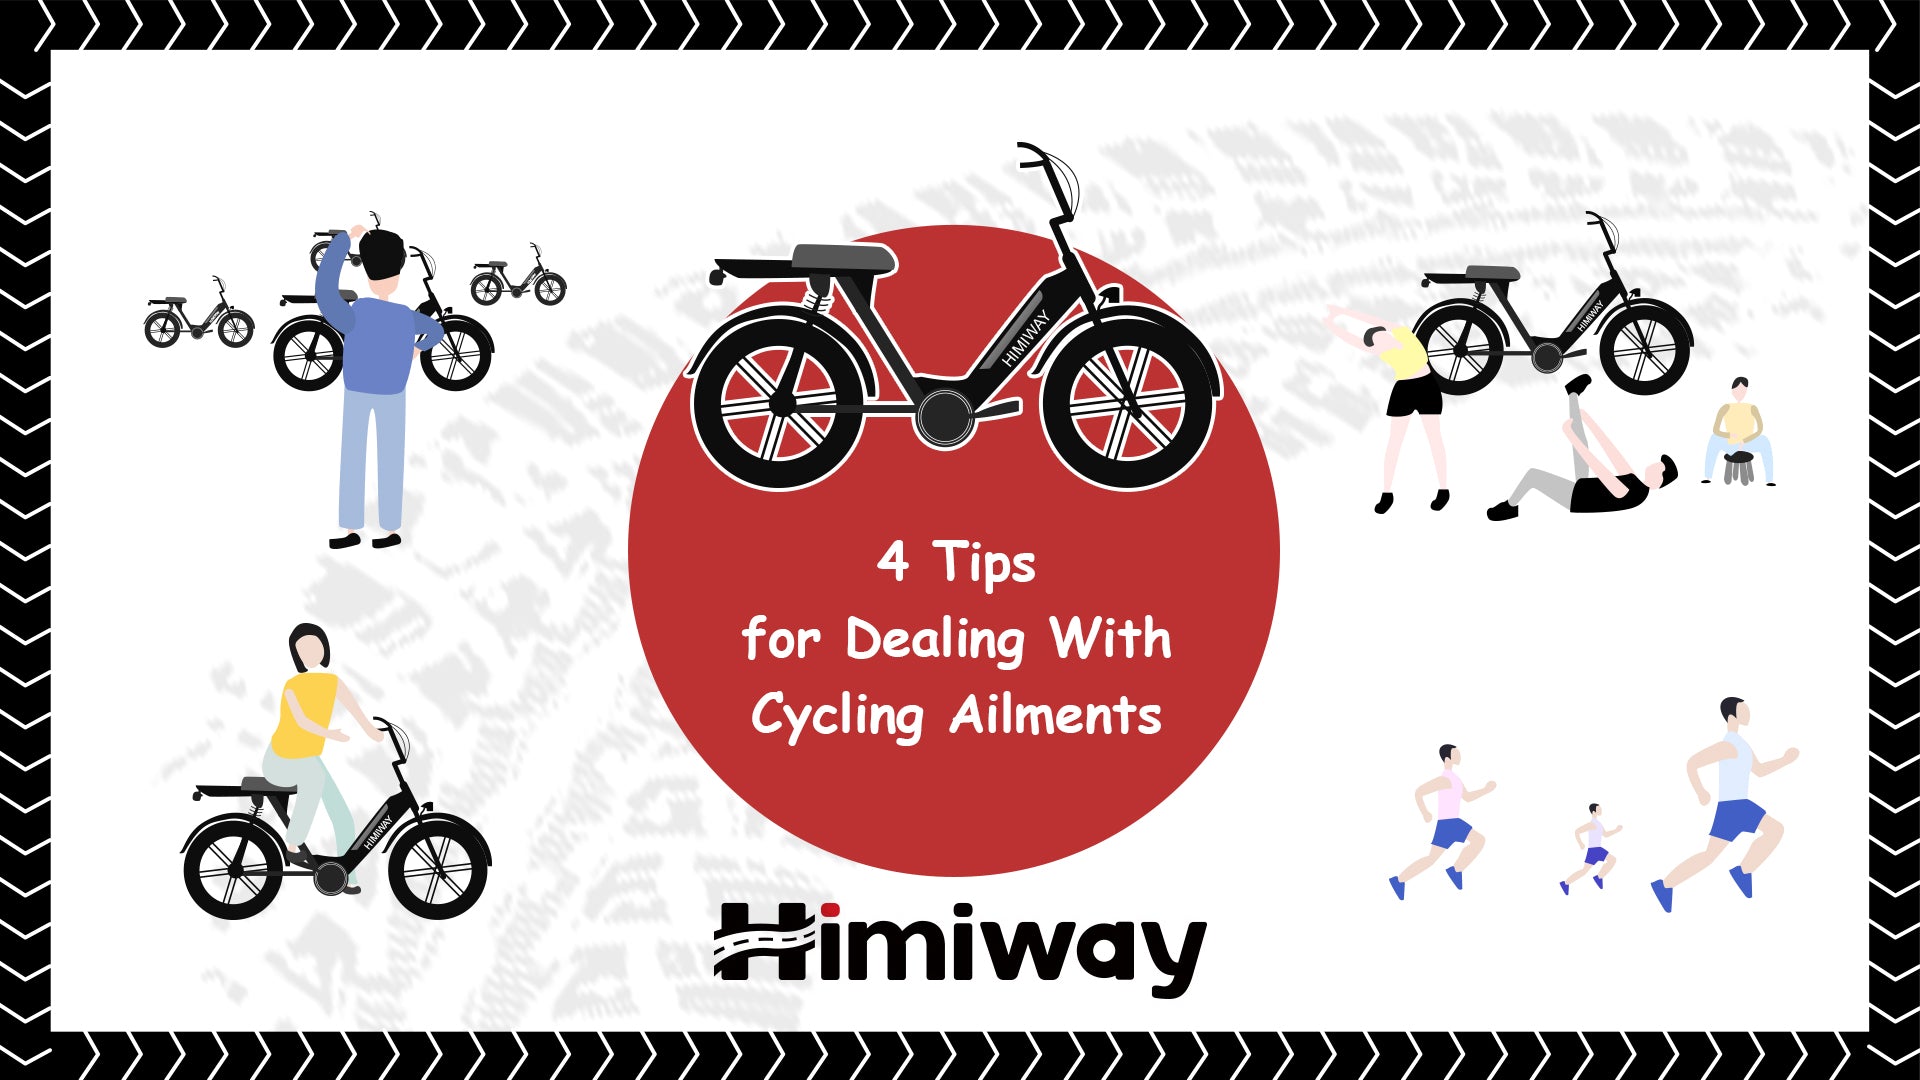 Himiway ESCAPE Moped-Style Electric Bike Tips for Dealing With Cycling Ailments